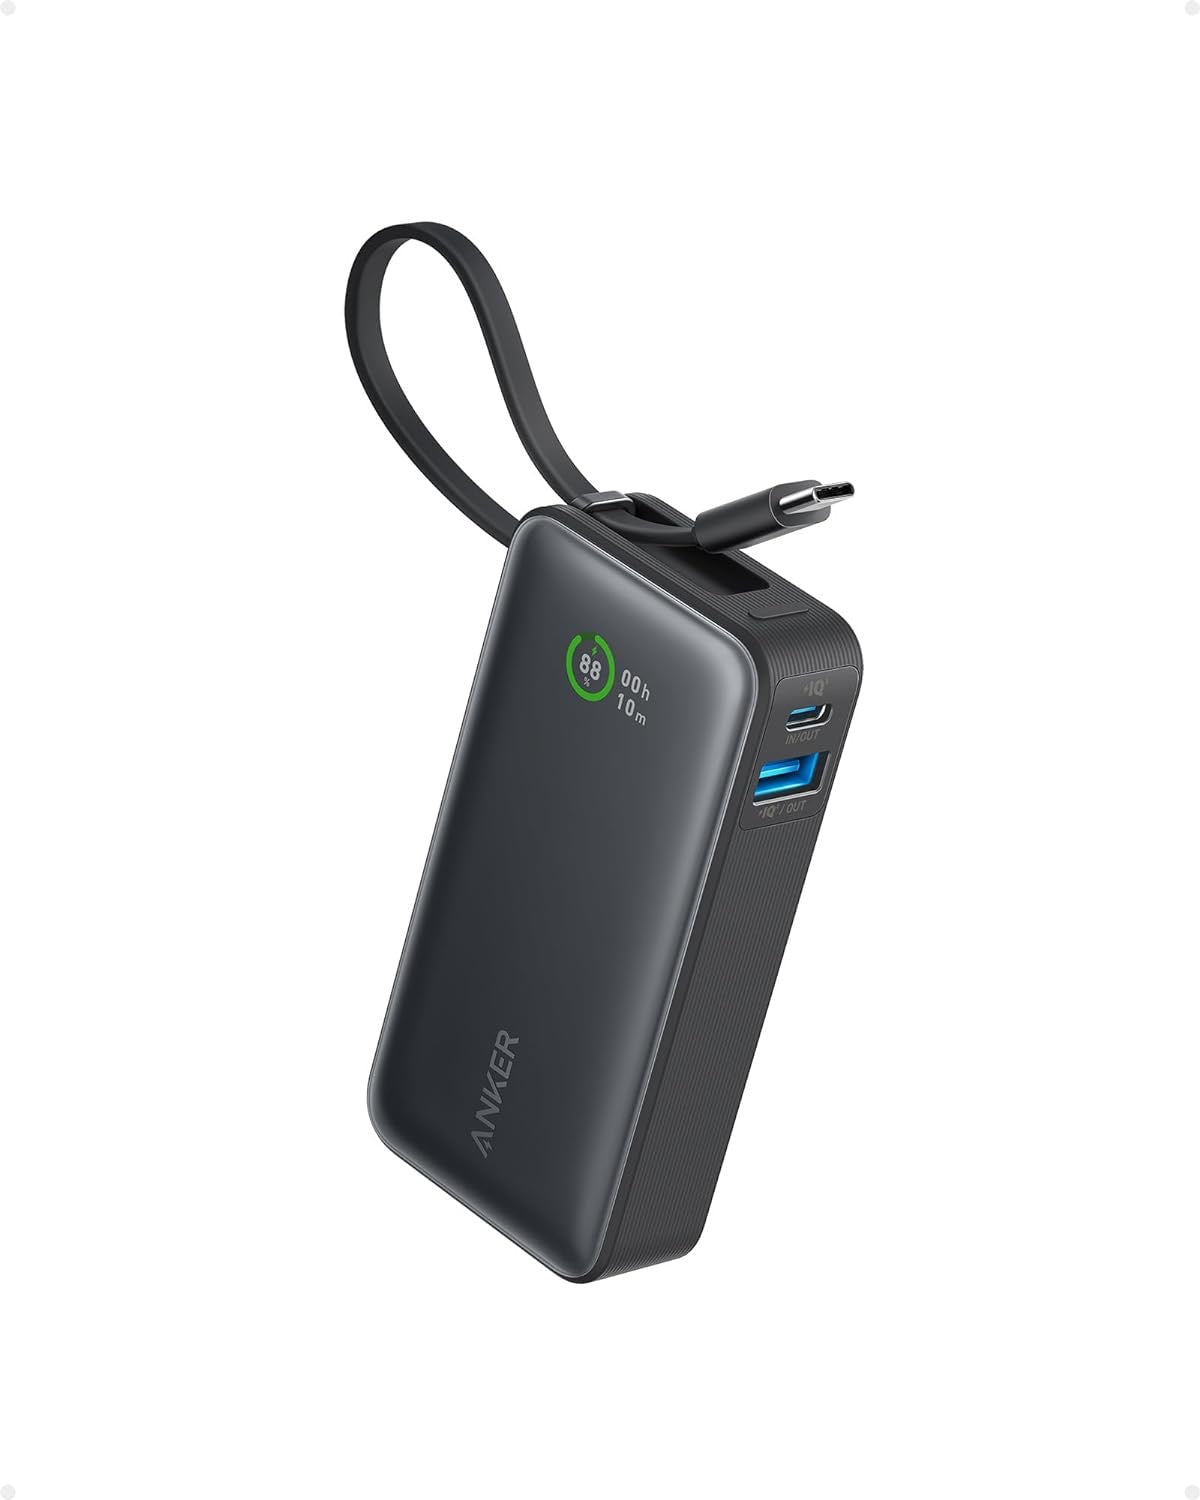 Anker Nano power bank 10000mah (30w,built-in usb-c cable)